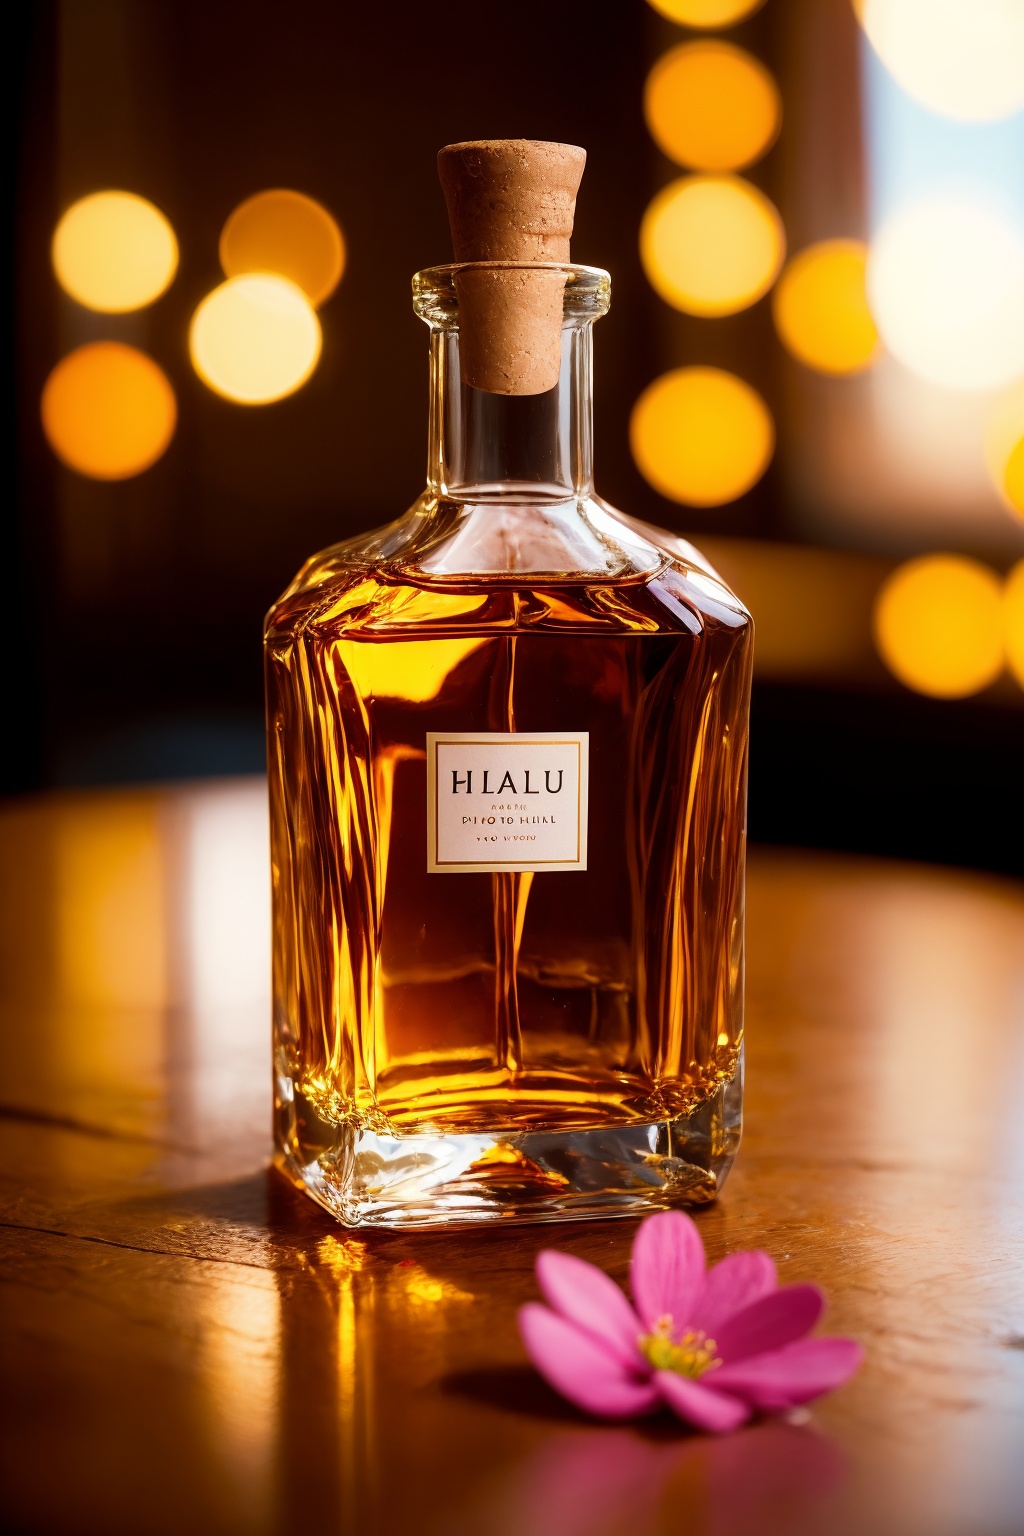 (photorealistic:1.4),(Realistic:1.2), no humans, flower, still life, pink flower, blurry, cup, realistic, glass, whiskey, depth of field, alcohol, drinking glass, bottle, blurry background, drink, photorealistic